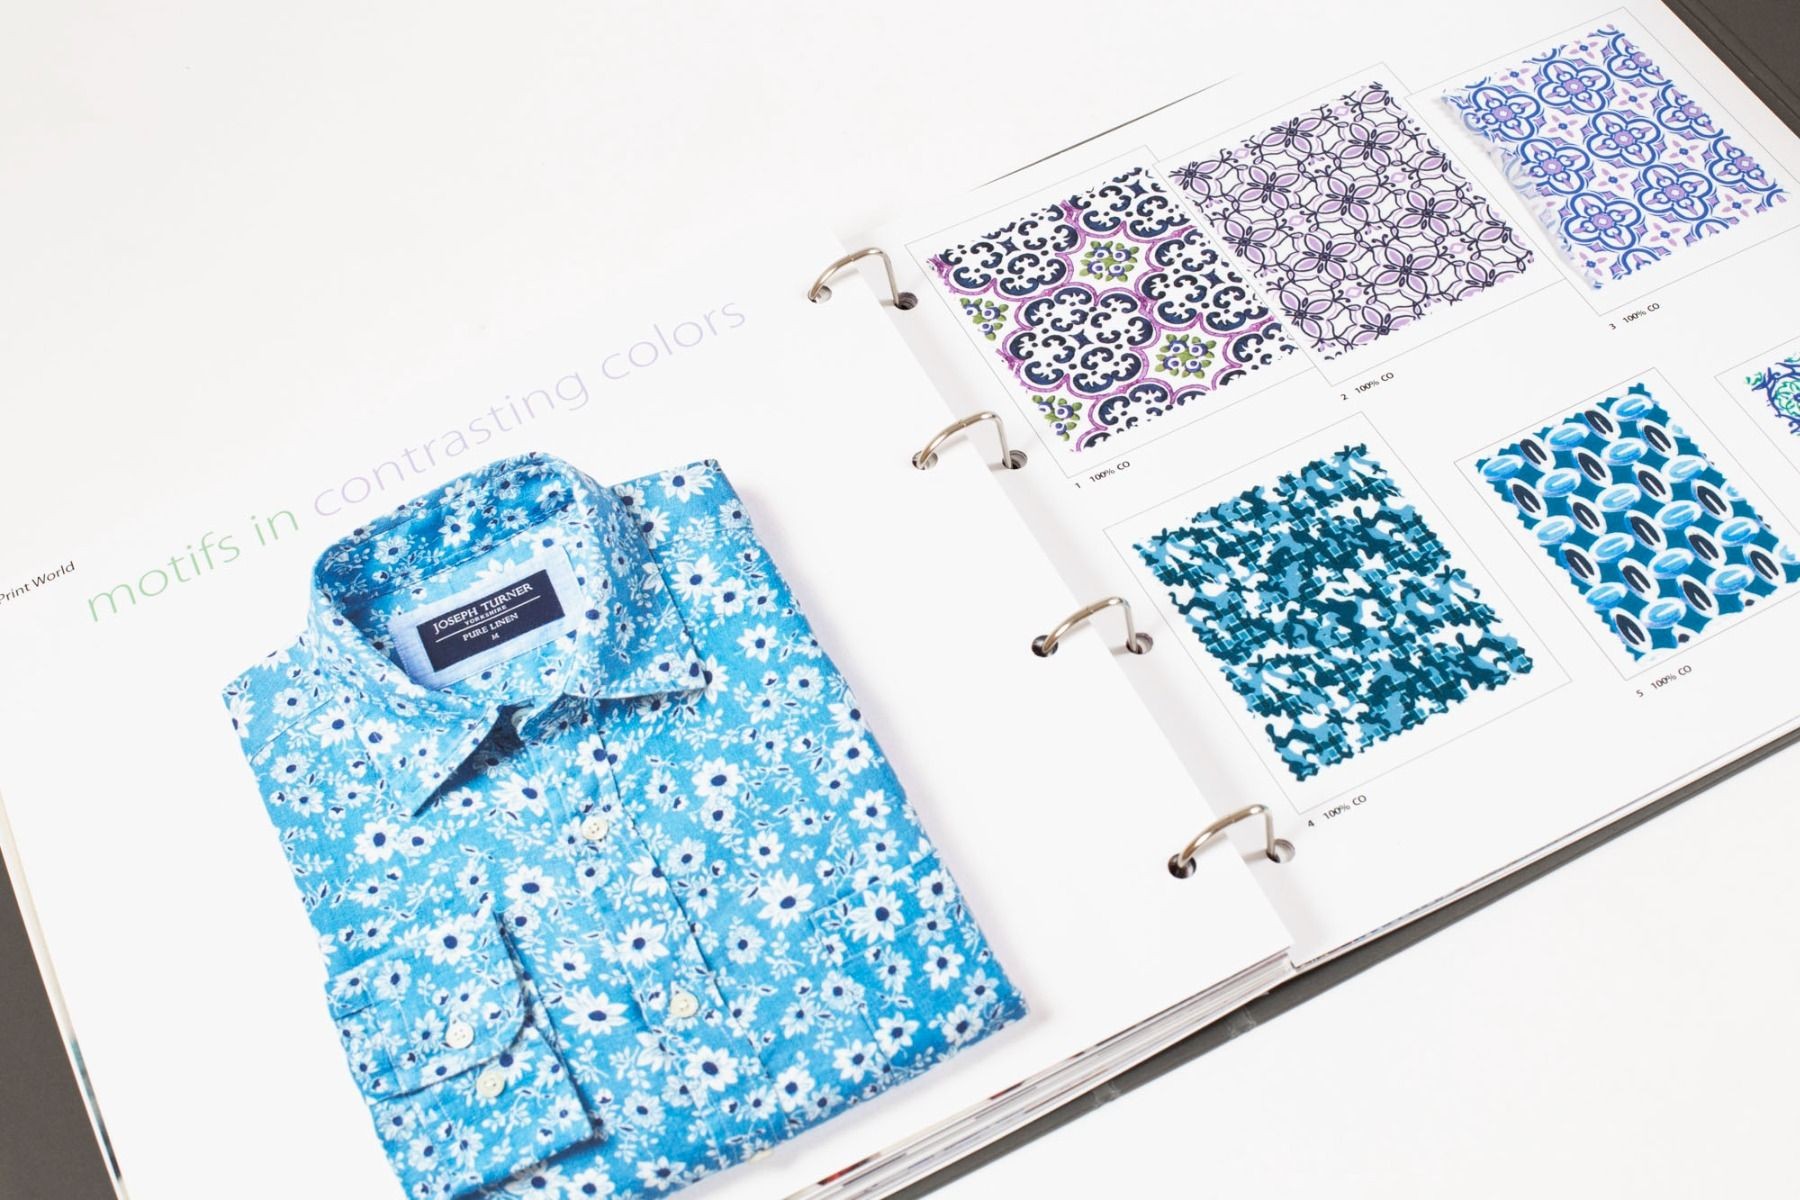 BTT Textile Print World Fabric Swatch Book for Men Prints for S/S